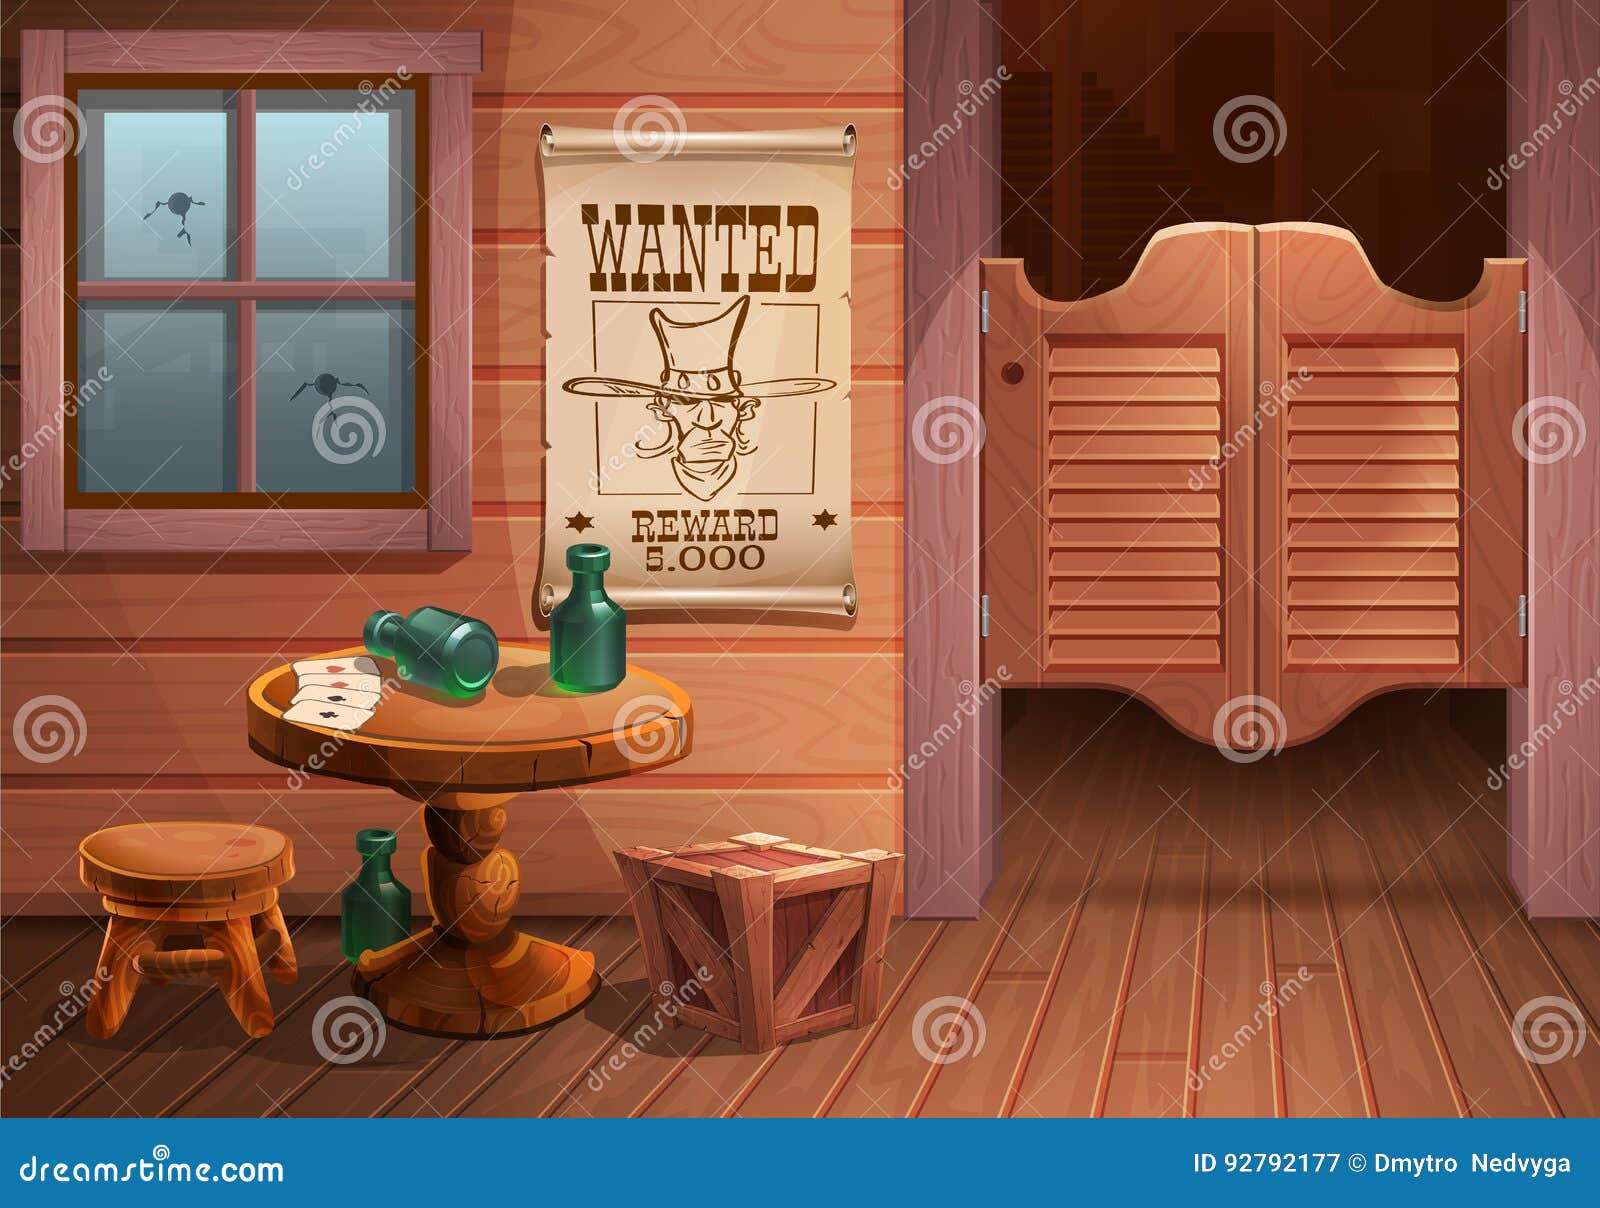 wild west background scene - door of the saloon, table with chair and poster with cowboy face and the inscription is wanted.